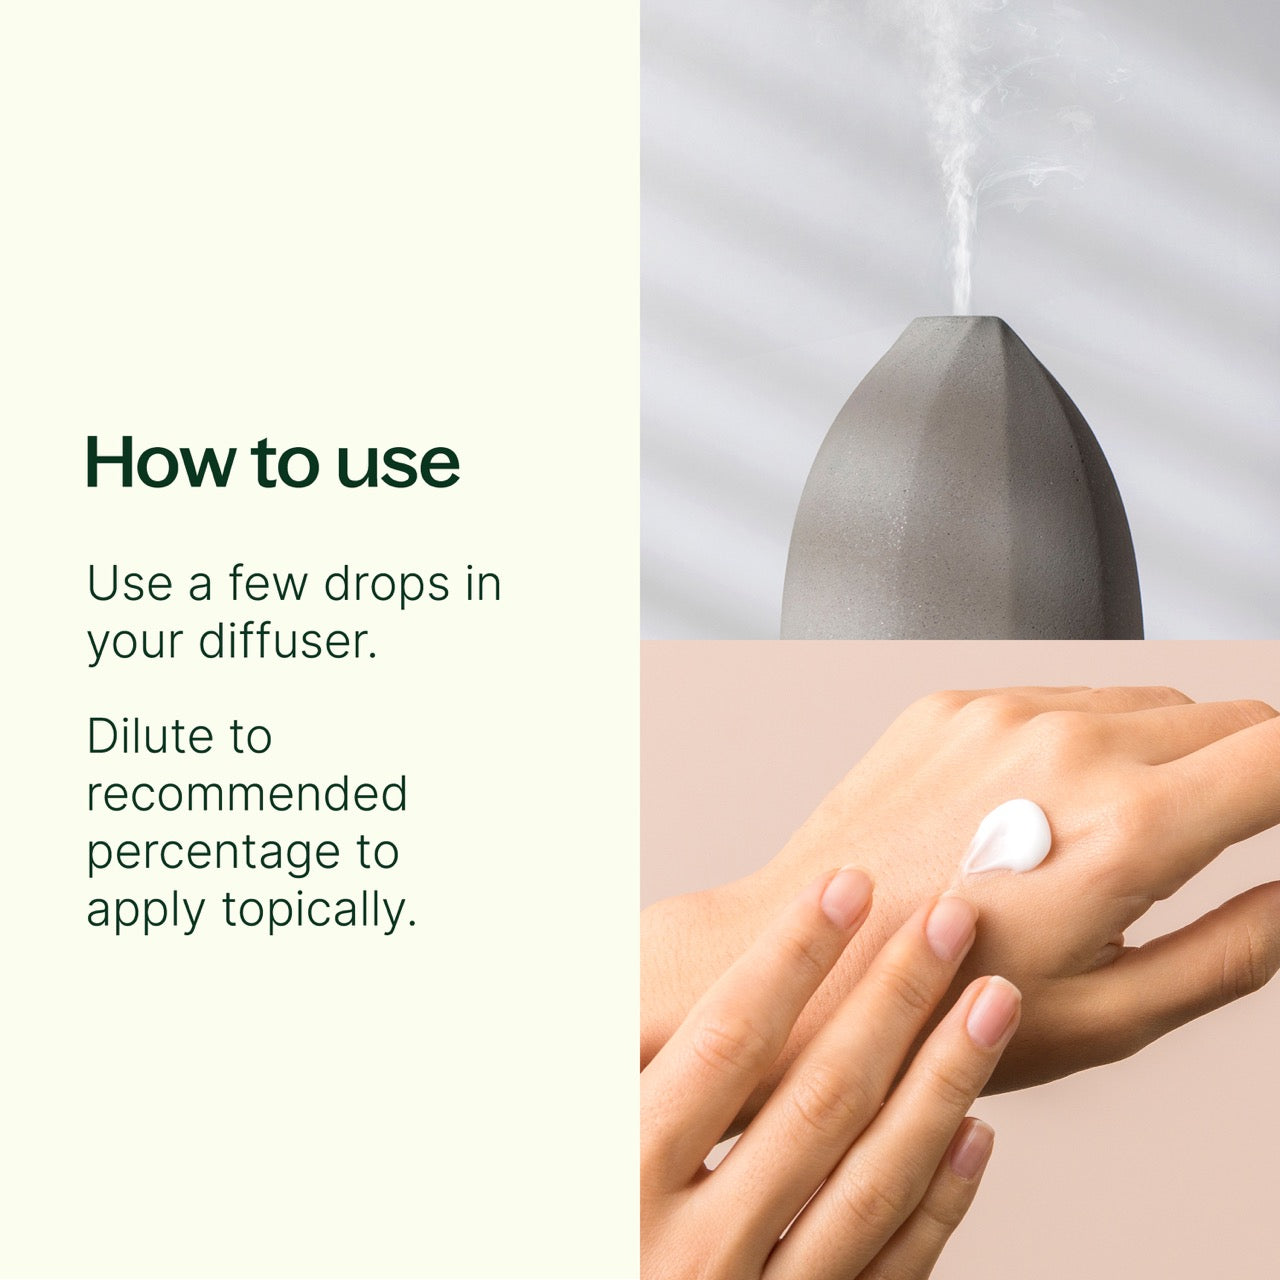 How to Use Top 6 Organic Singles Essential Oil Set: Use a few drops in your diffuser or diluted to recommended percentage to apply topically.